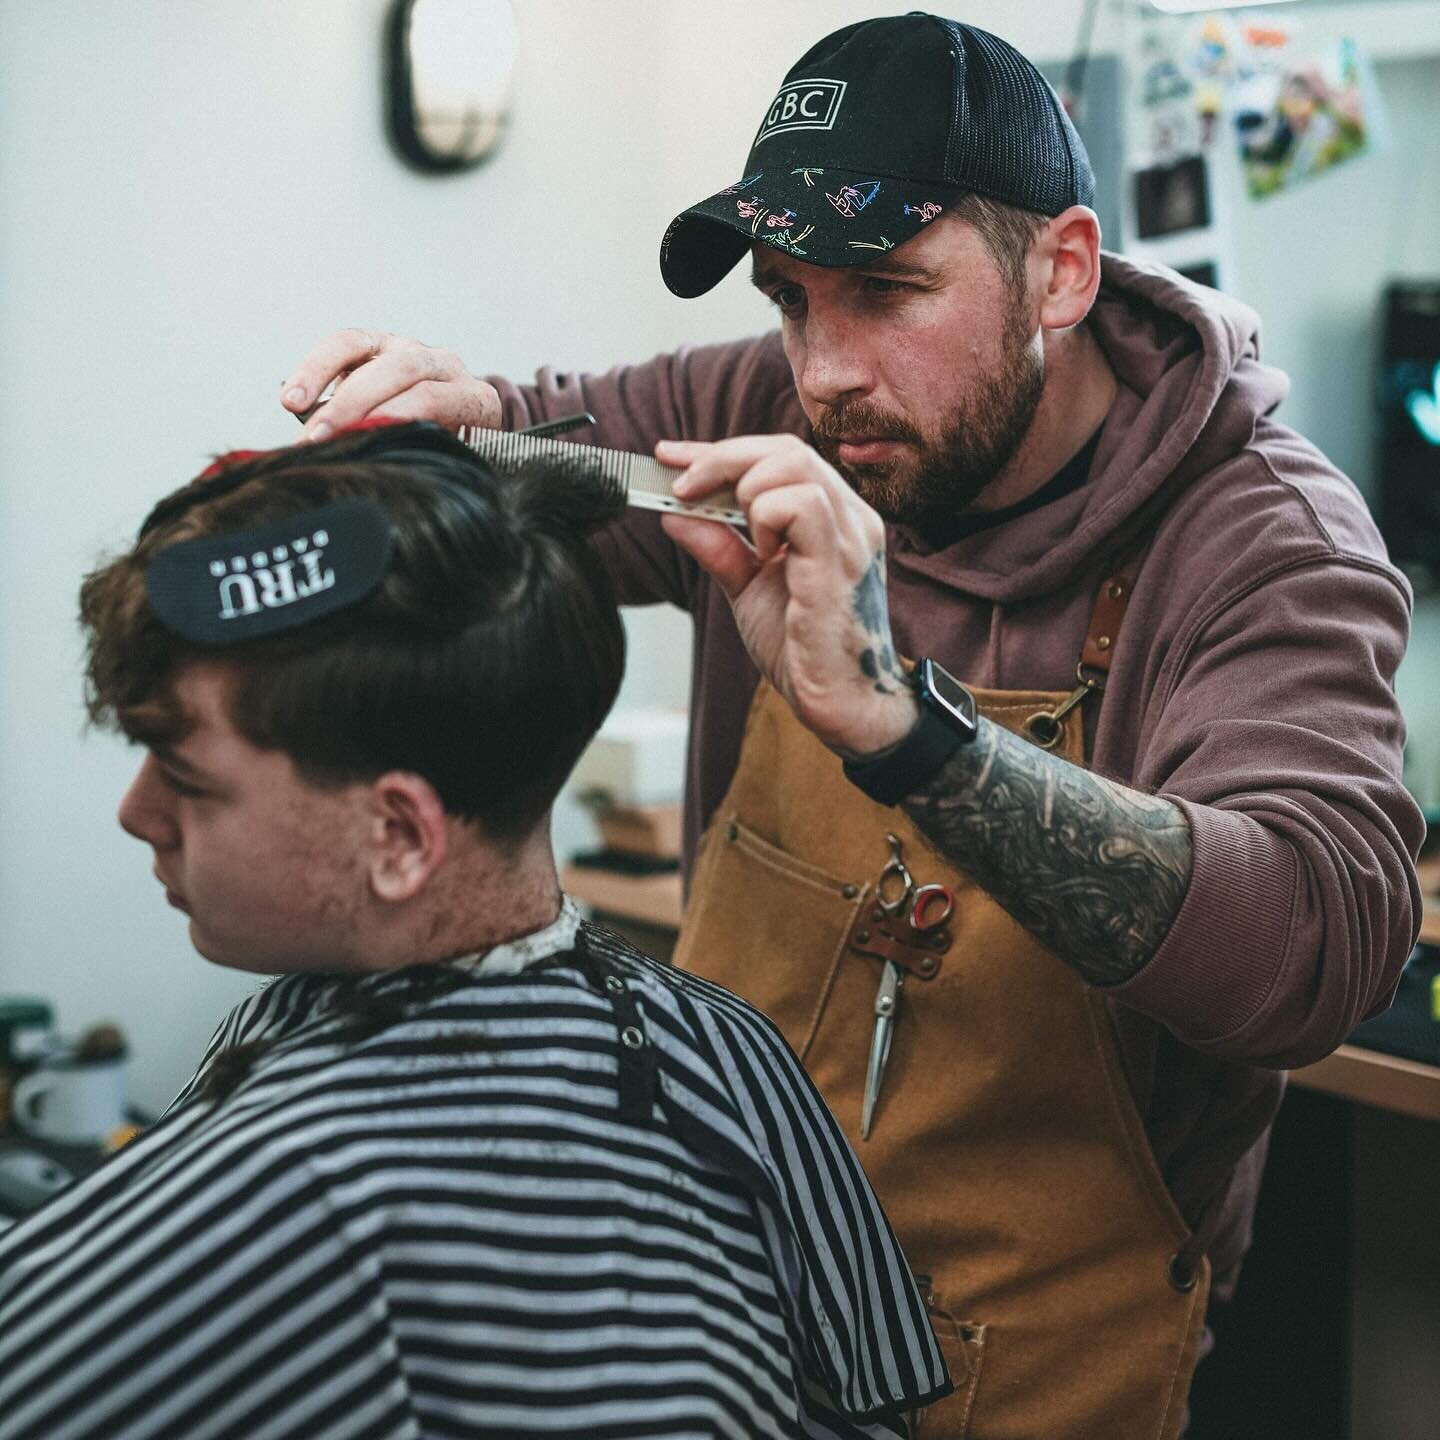 A talented barber who puts his all into every haircut, give it up for Serhii! The neatest sections and most precision cutting you&rsquo;ll find in a barbershop 💈